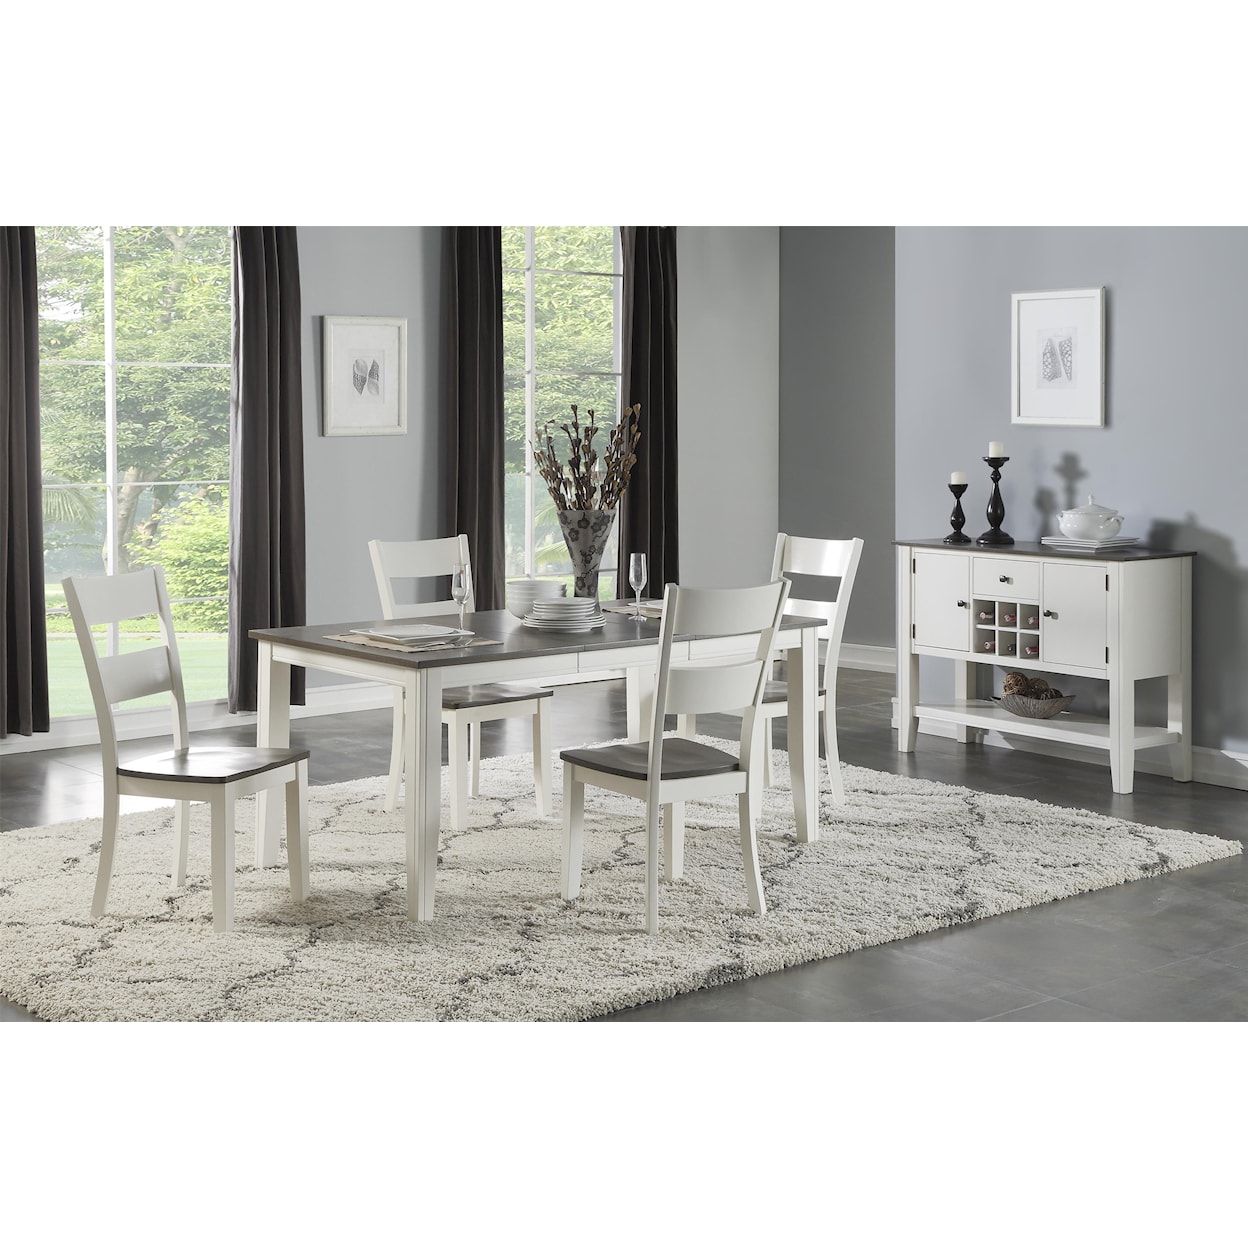 HH Carey White Table + 4 Chairs